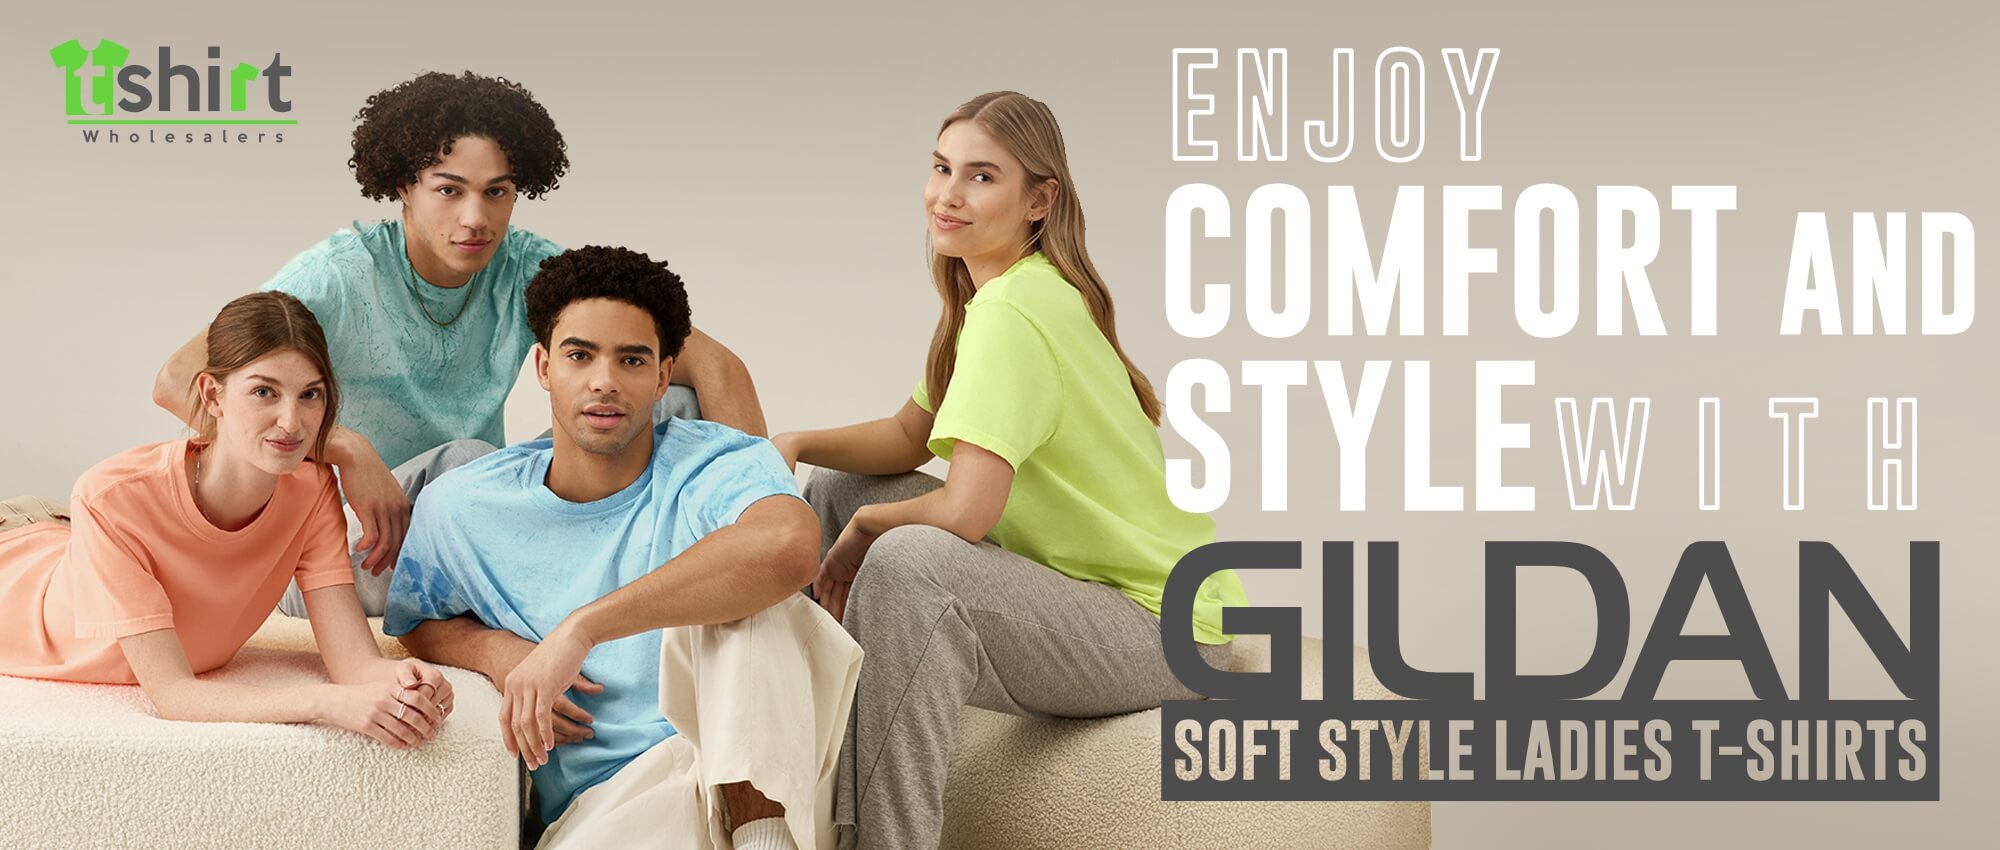 ENJOY COMFORT AND STYLE WITH GILDAN SOFT STYLE LADIES T-SHIRTS